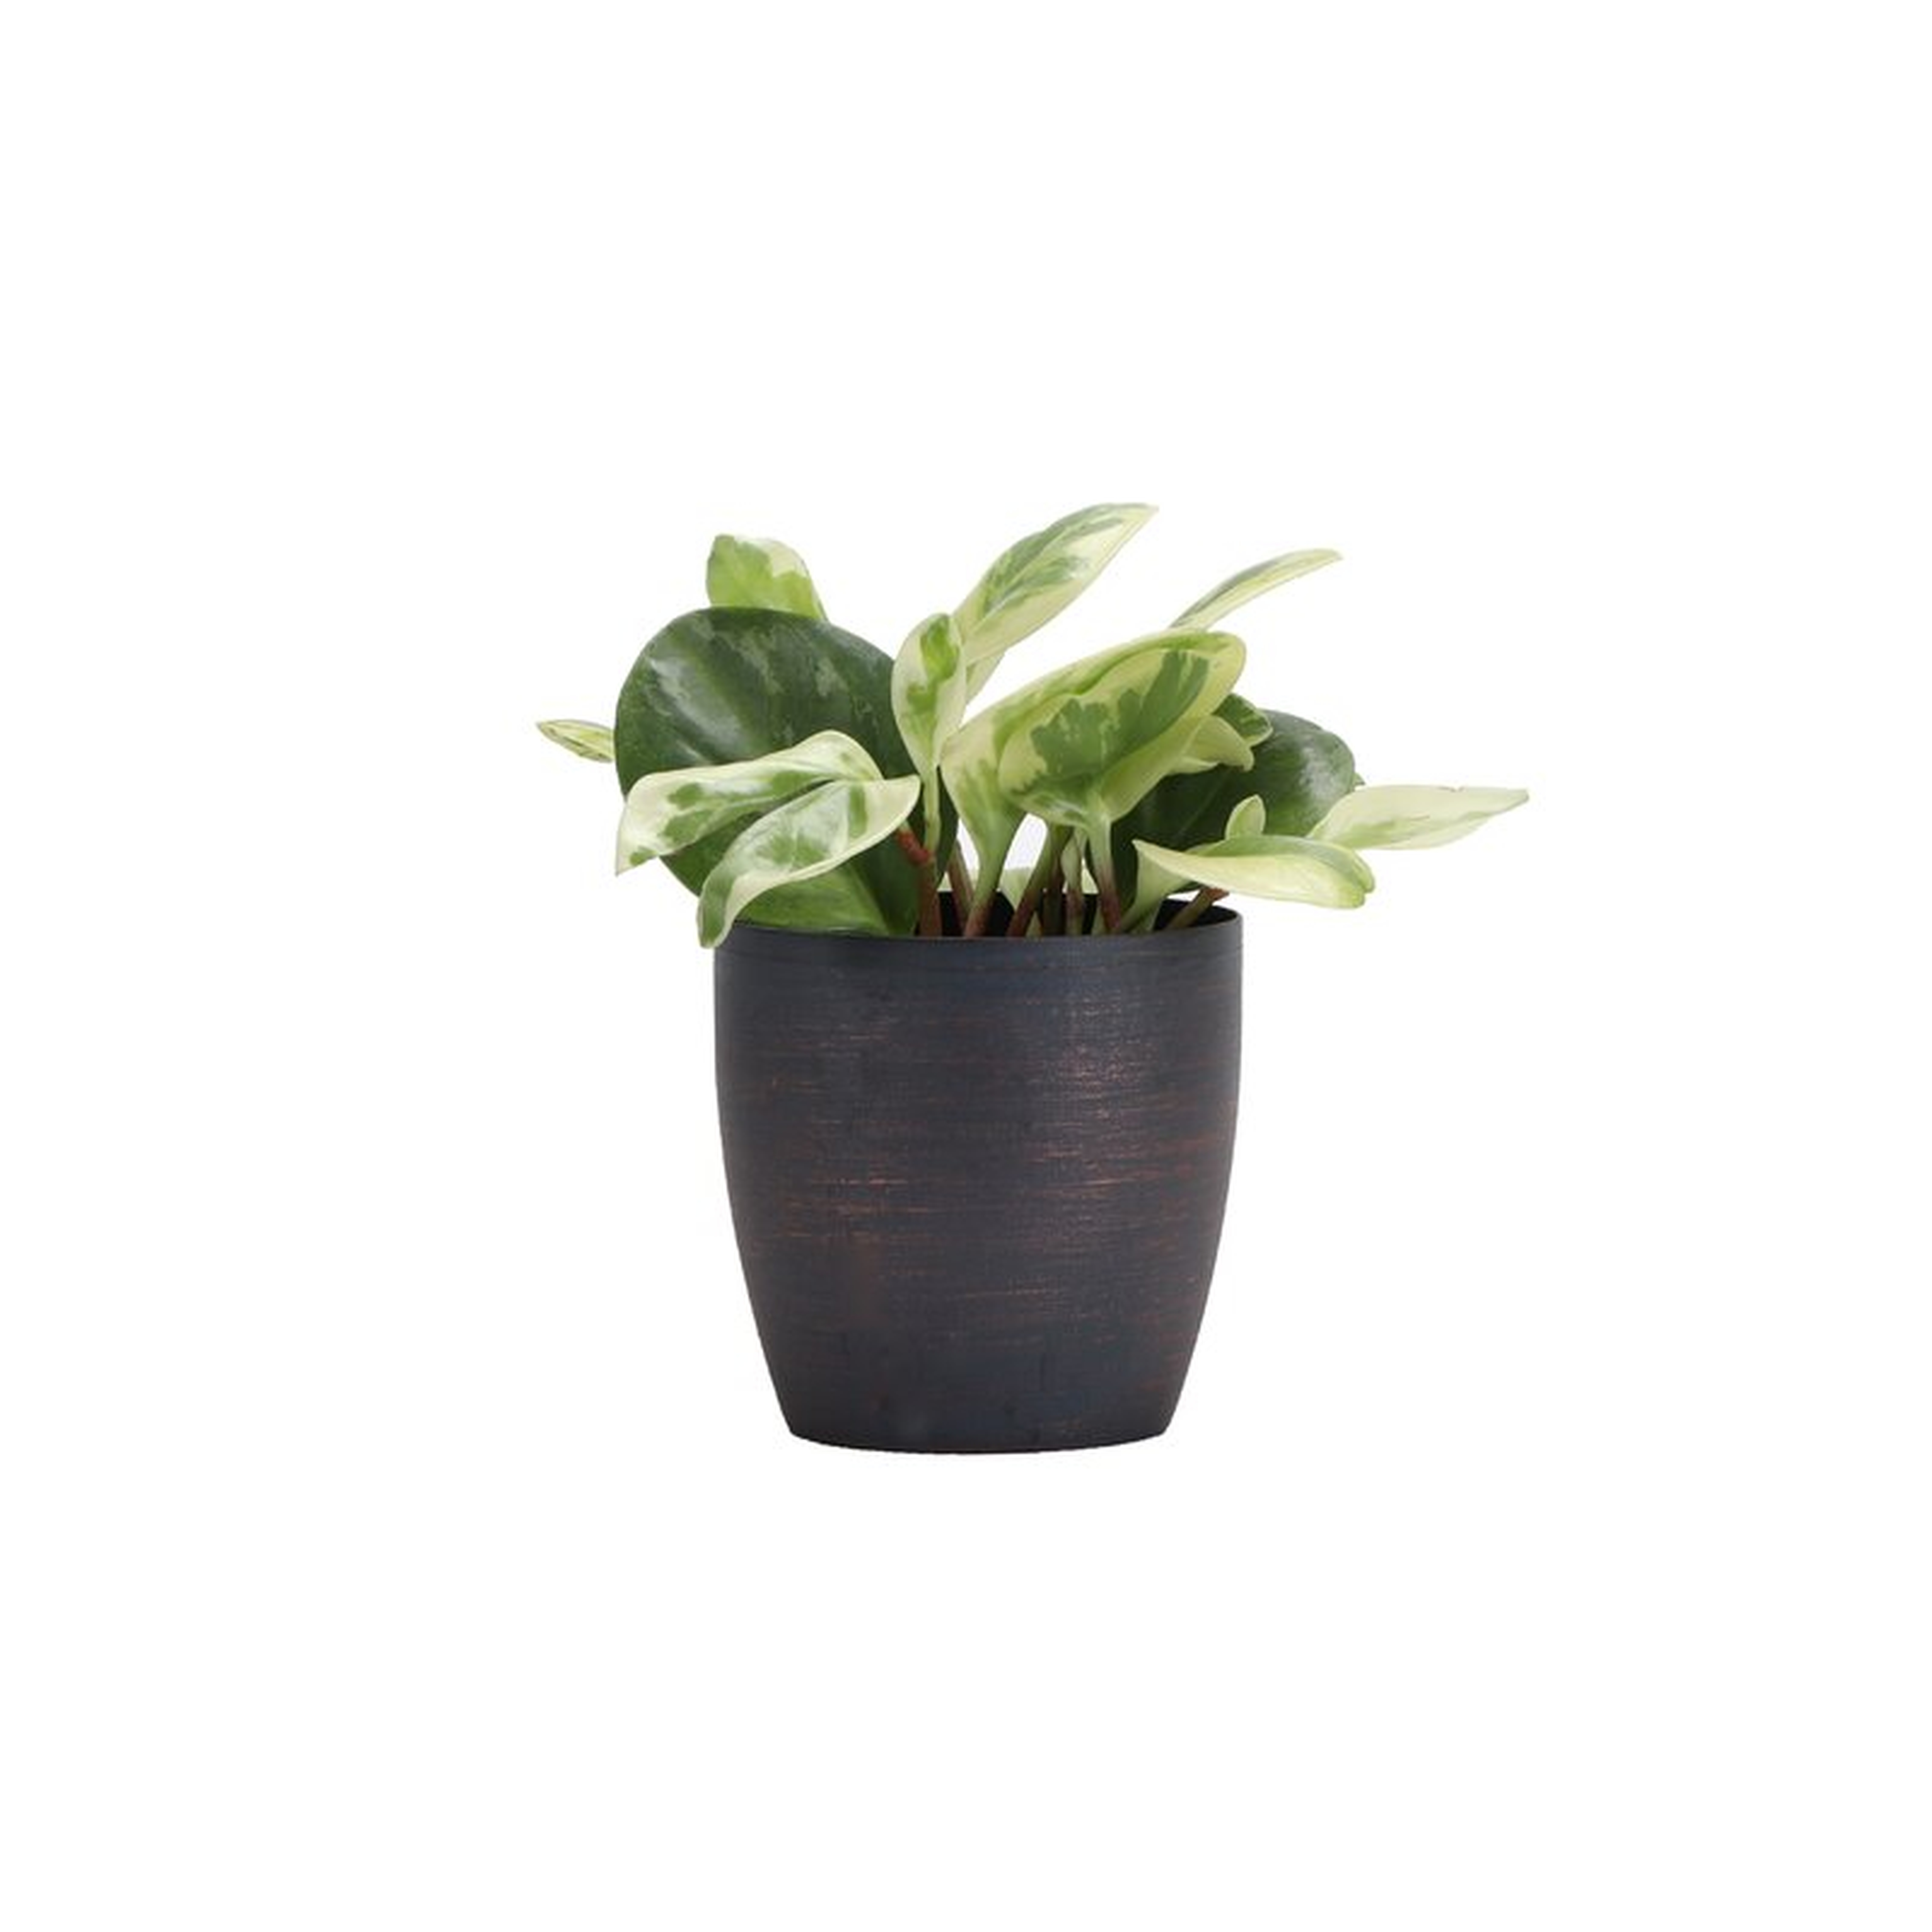 Thorsen's Greenhouse 7" Live Peperomia Plant in Pot Base Color: Brushed Copper - Perigold